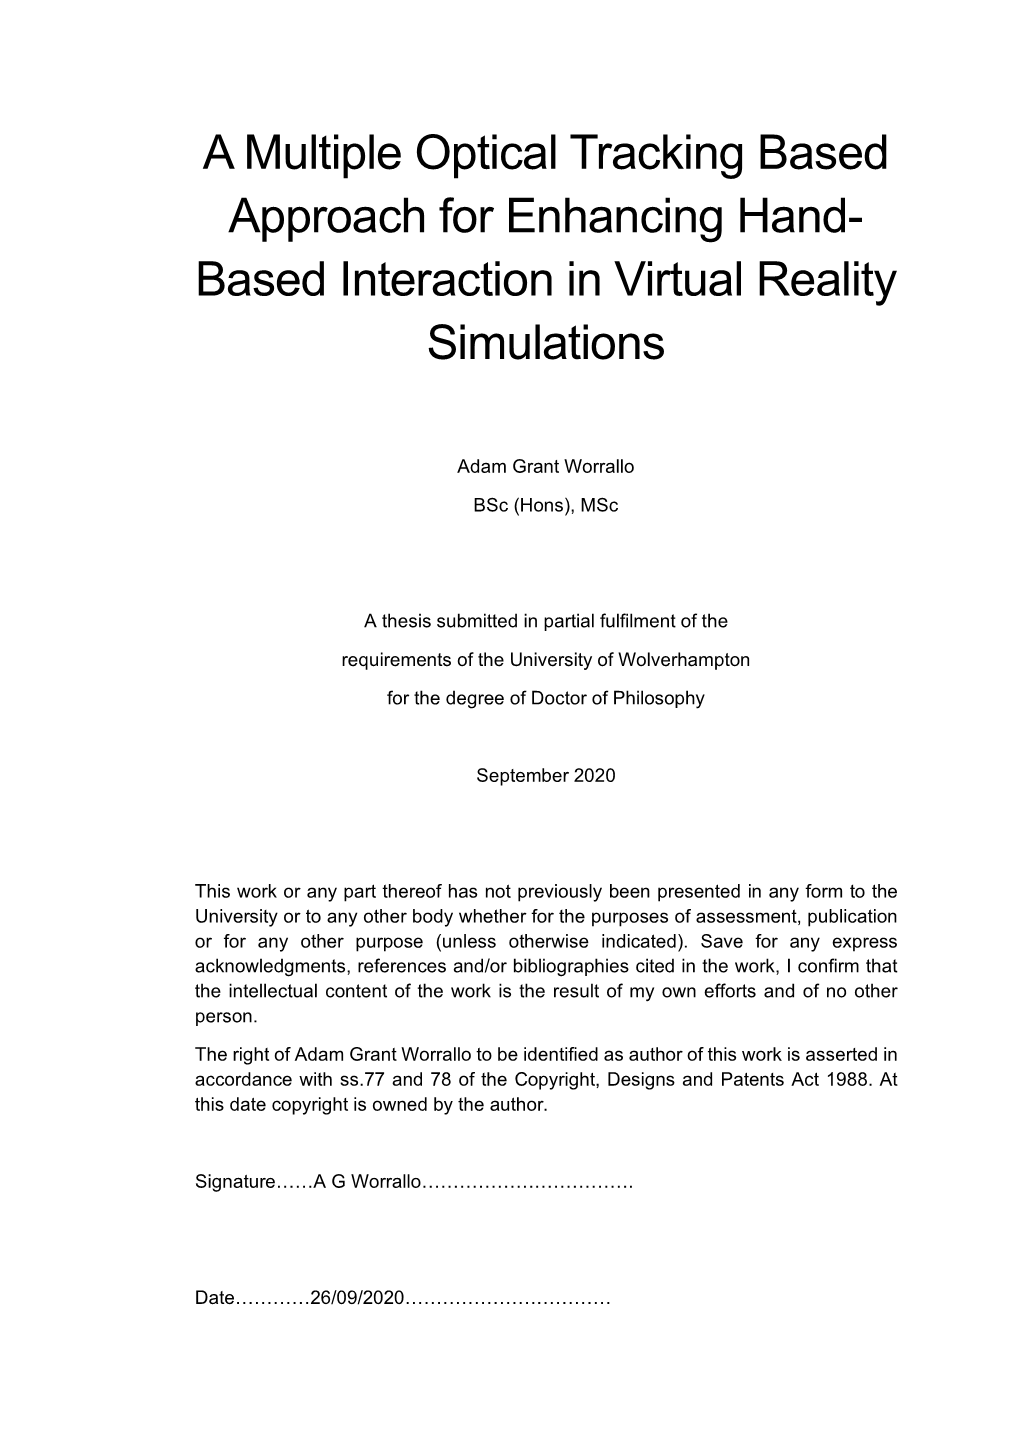 A Multiple Optical Tracking Based Approach for Enhancing Hand- Based Interaction in Virtual Reality Simulations